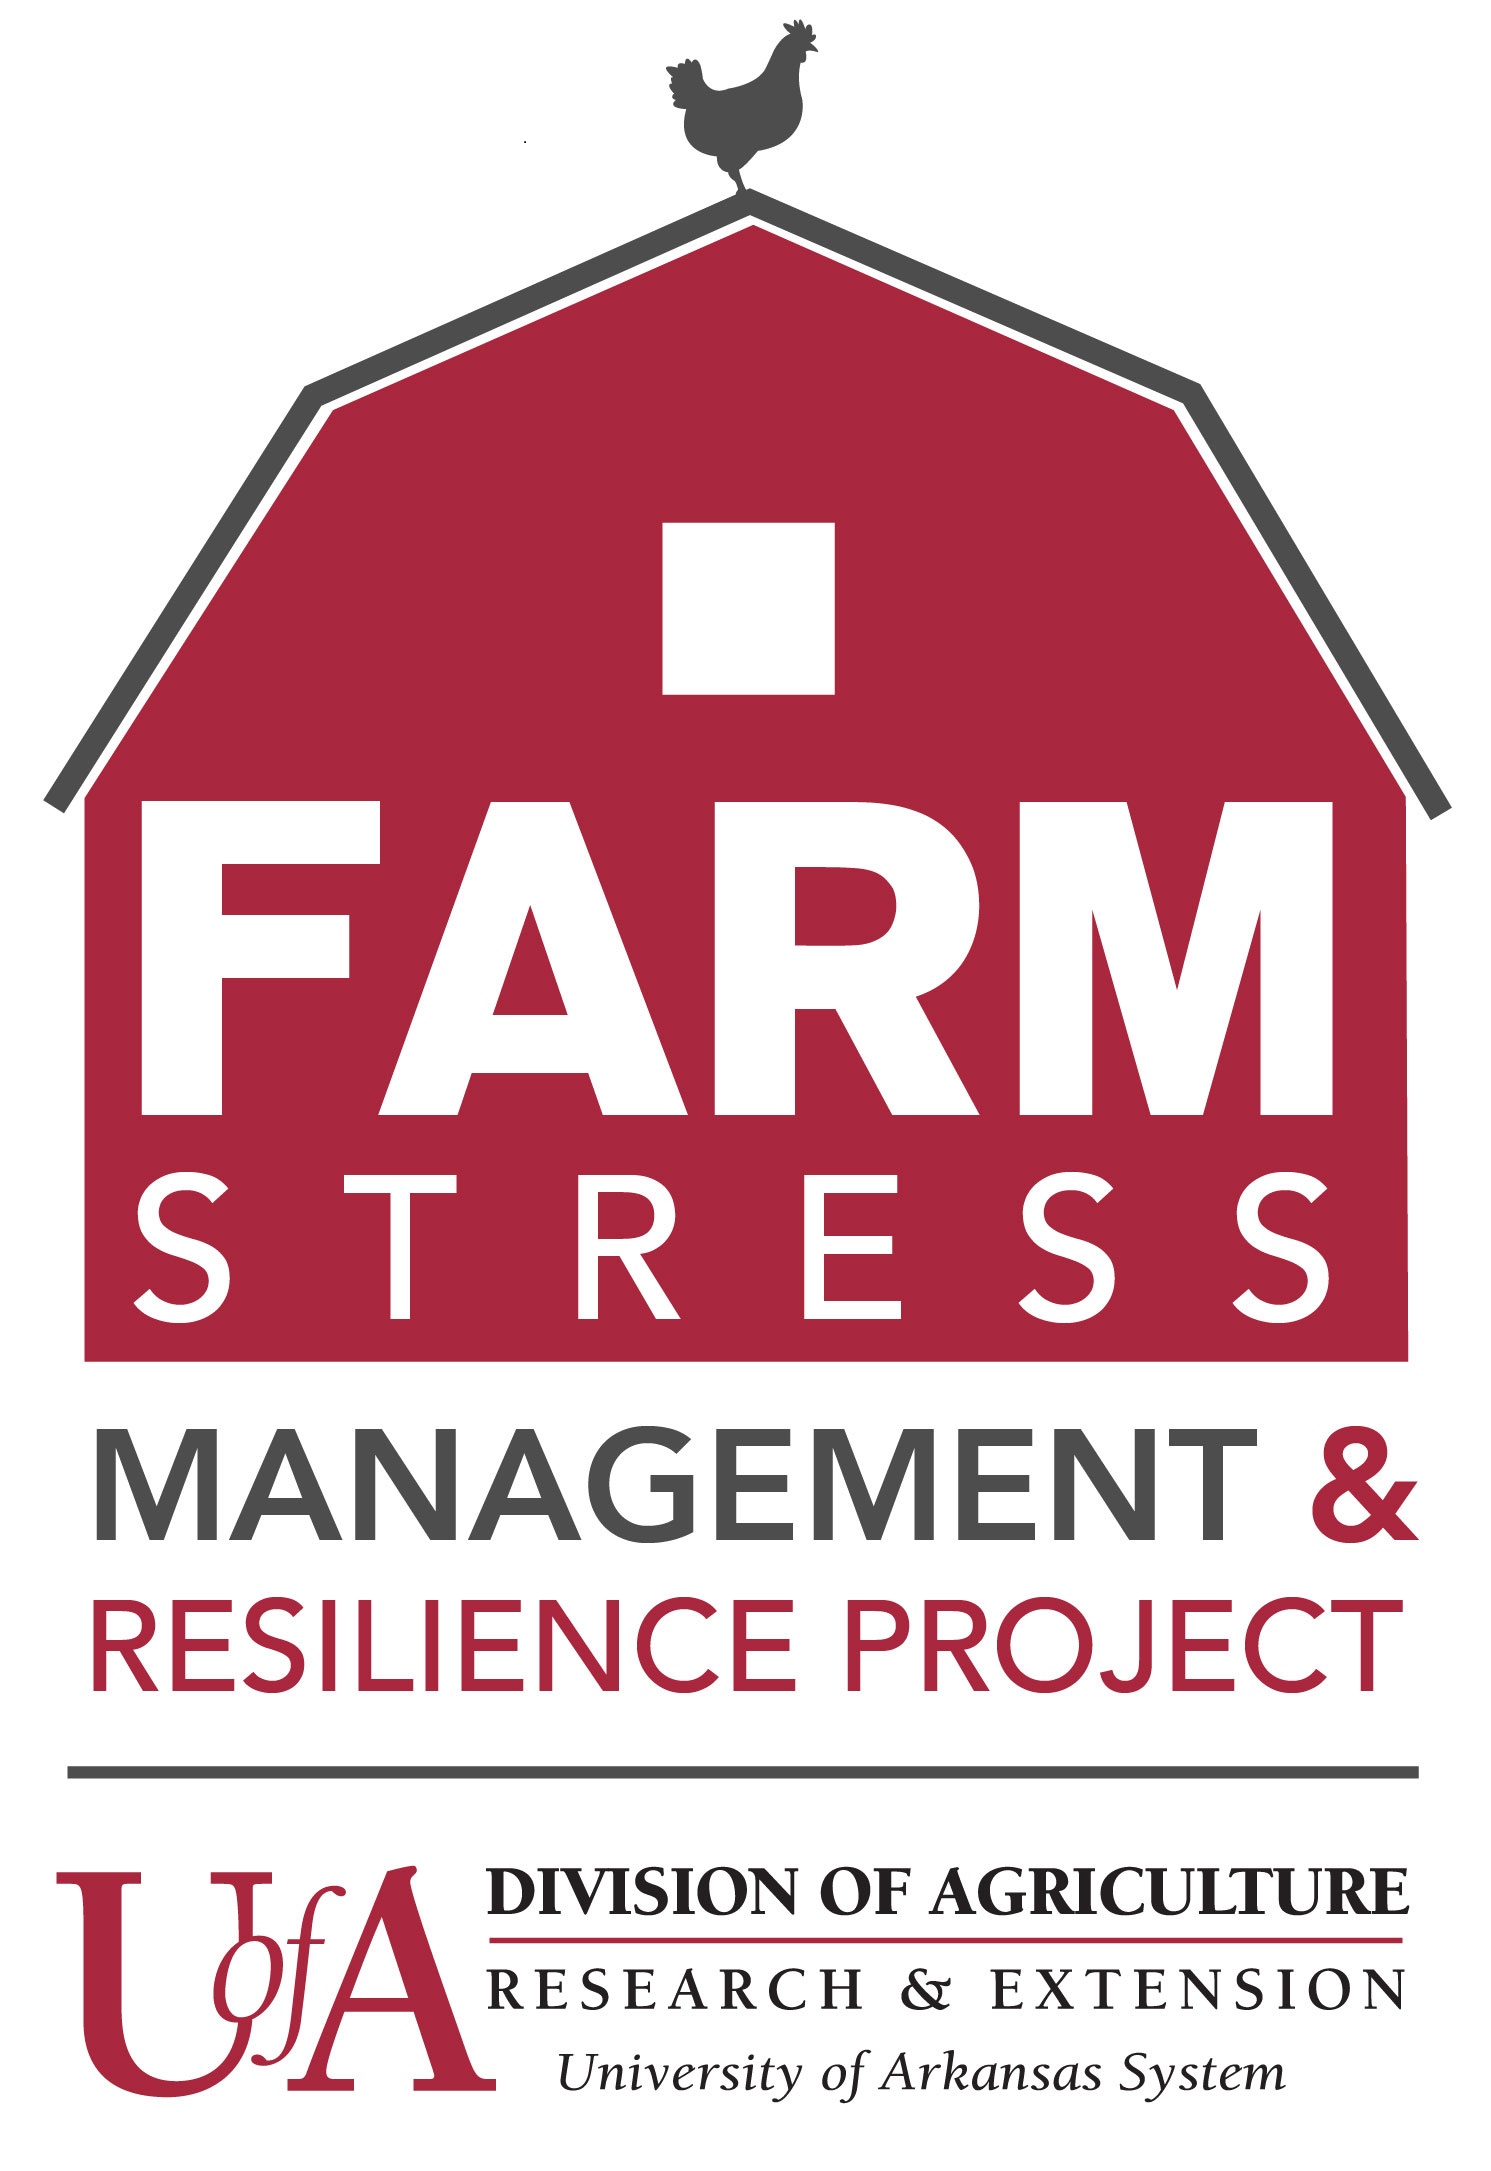 Red barn with title Farm Stress Management and Resilience Project